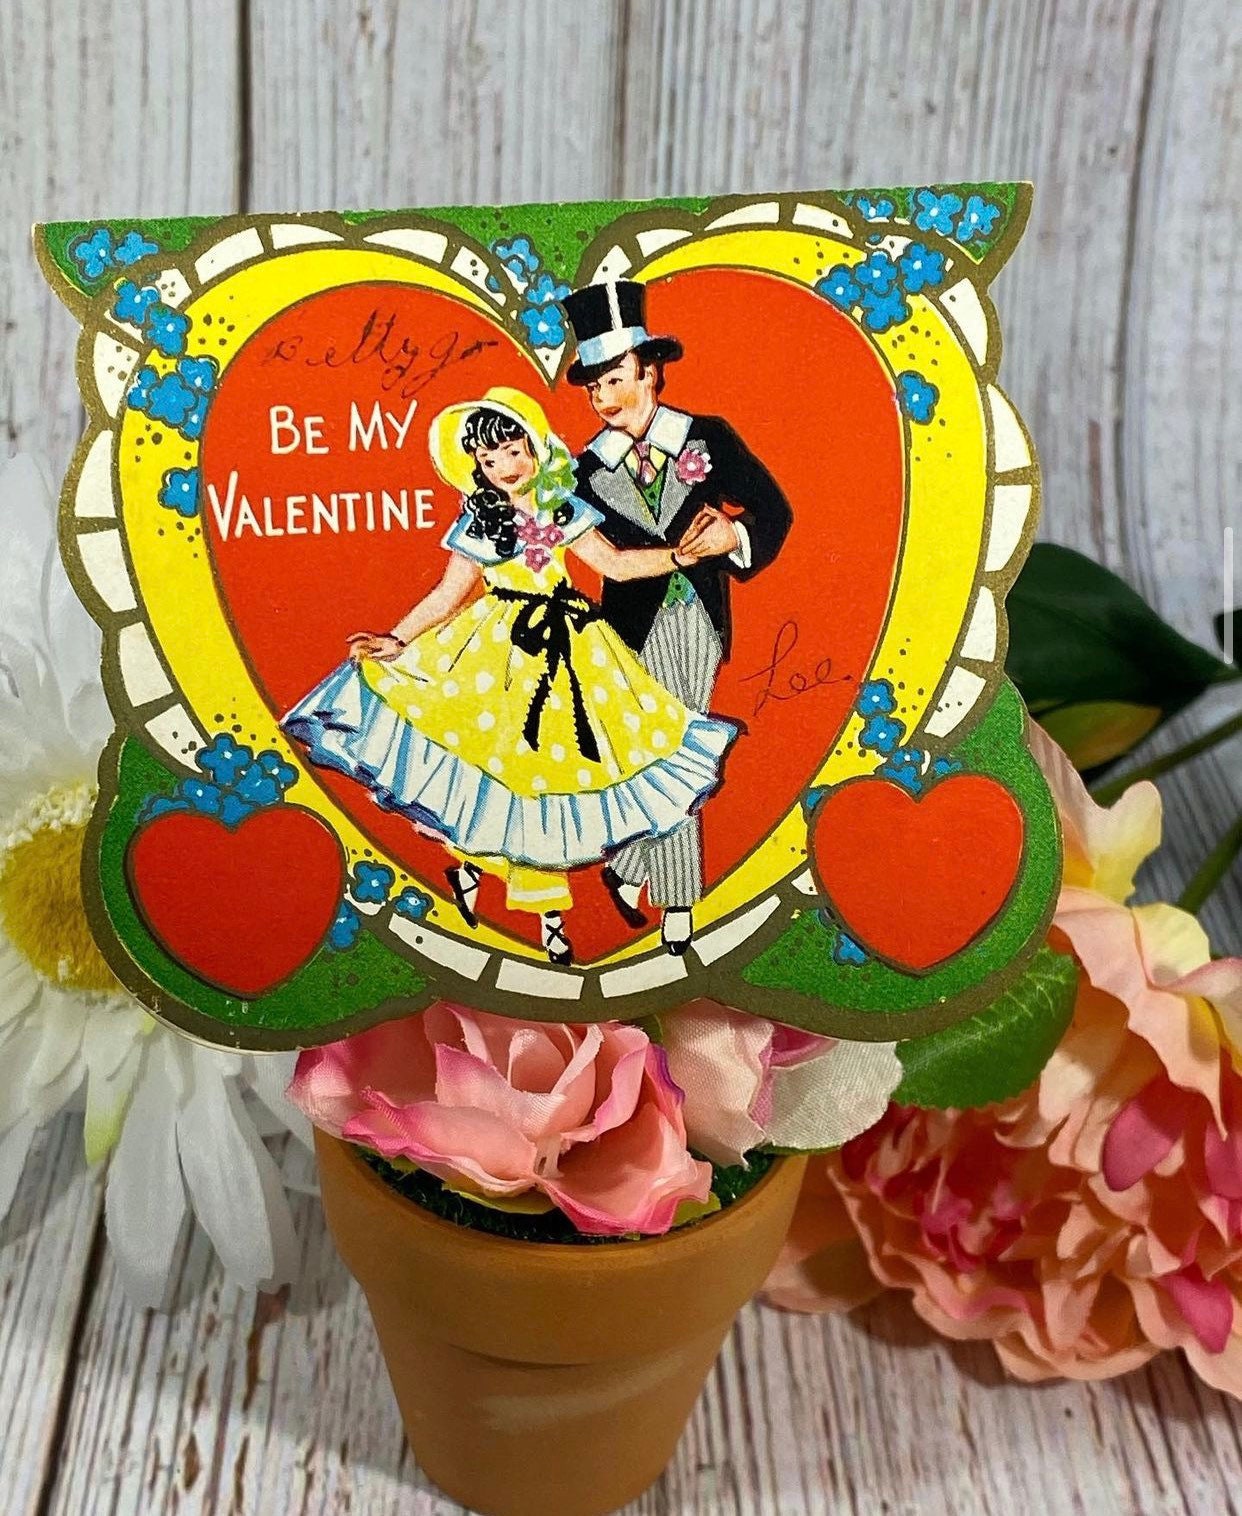 Vintage Victorian Valentines Day Cupids cards Ephemera: Vintage Themed  Collection of One-Sided Decorative Paper of Authentic Ephemera for Junk  Journals, Scrapbooking, Collage, Card Making, and Many Other Crafts.:  PRESS, NINA: Books 